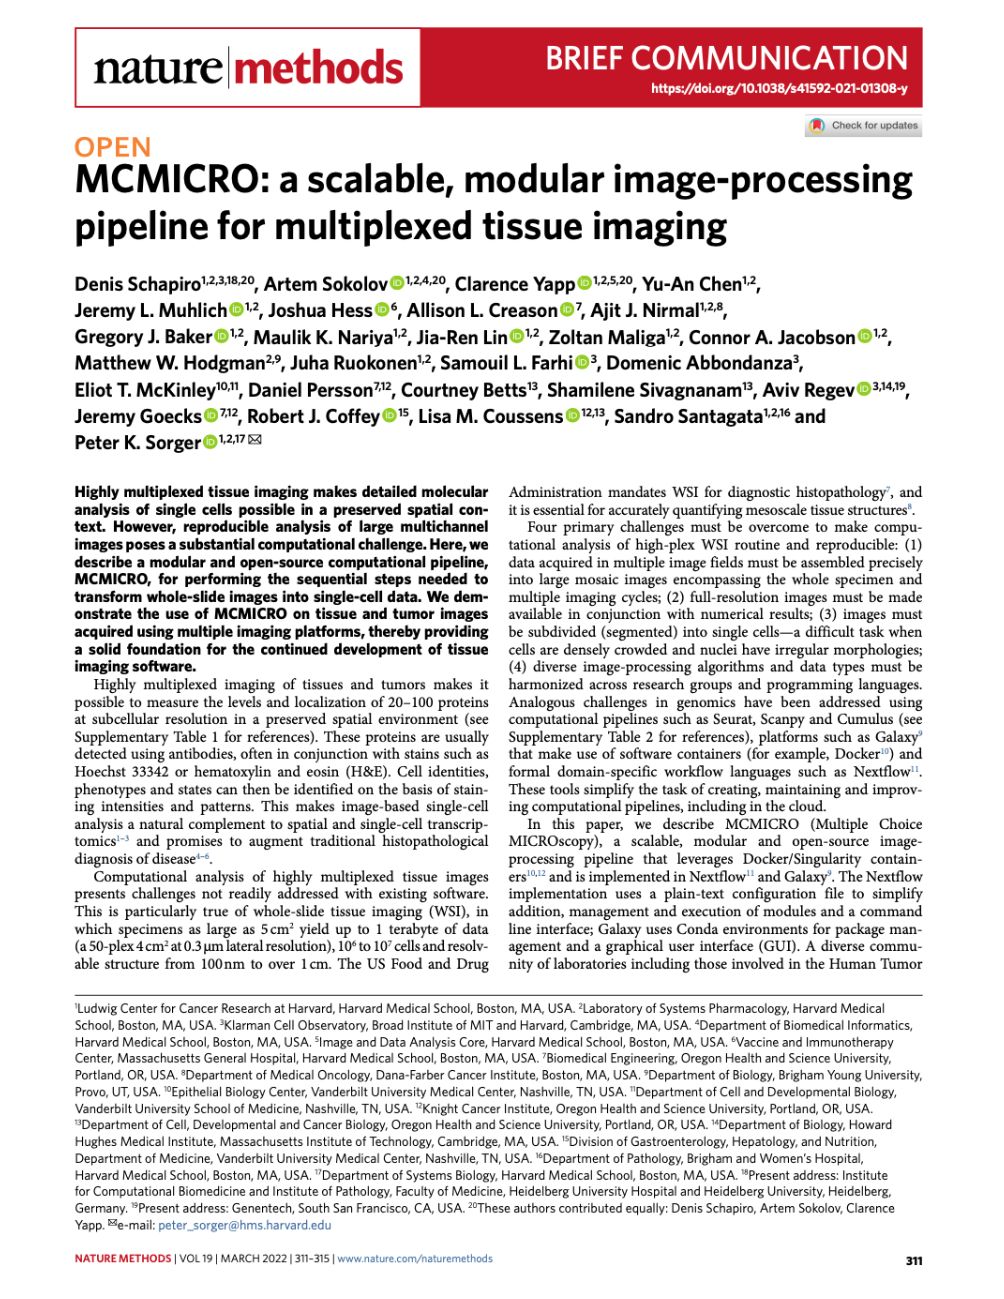 MCMICRO- A scalable, modular image-processing pipeline for multiplexed tissue imaging